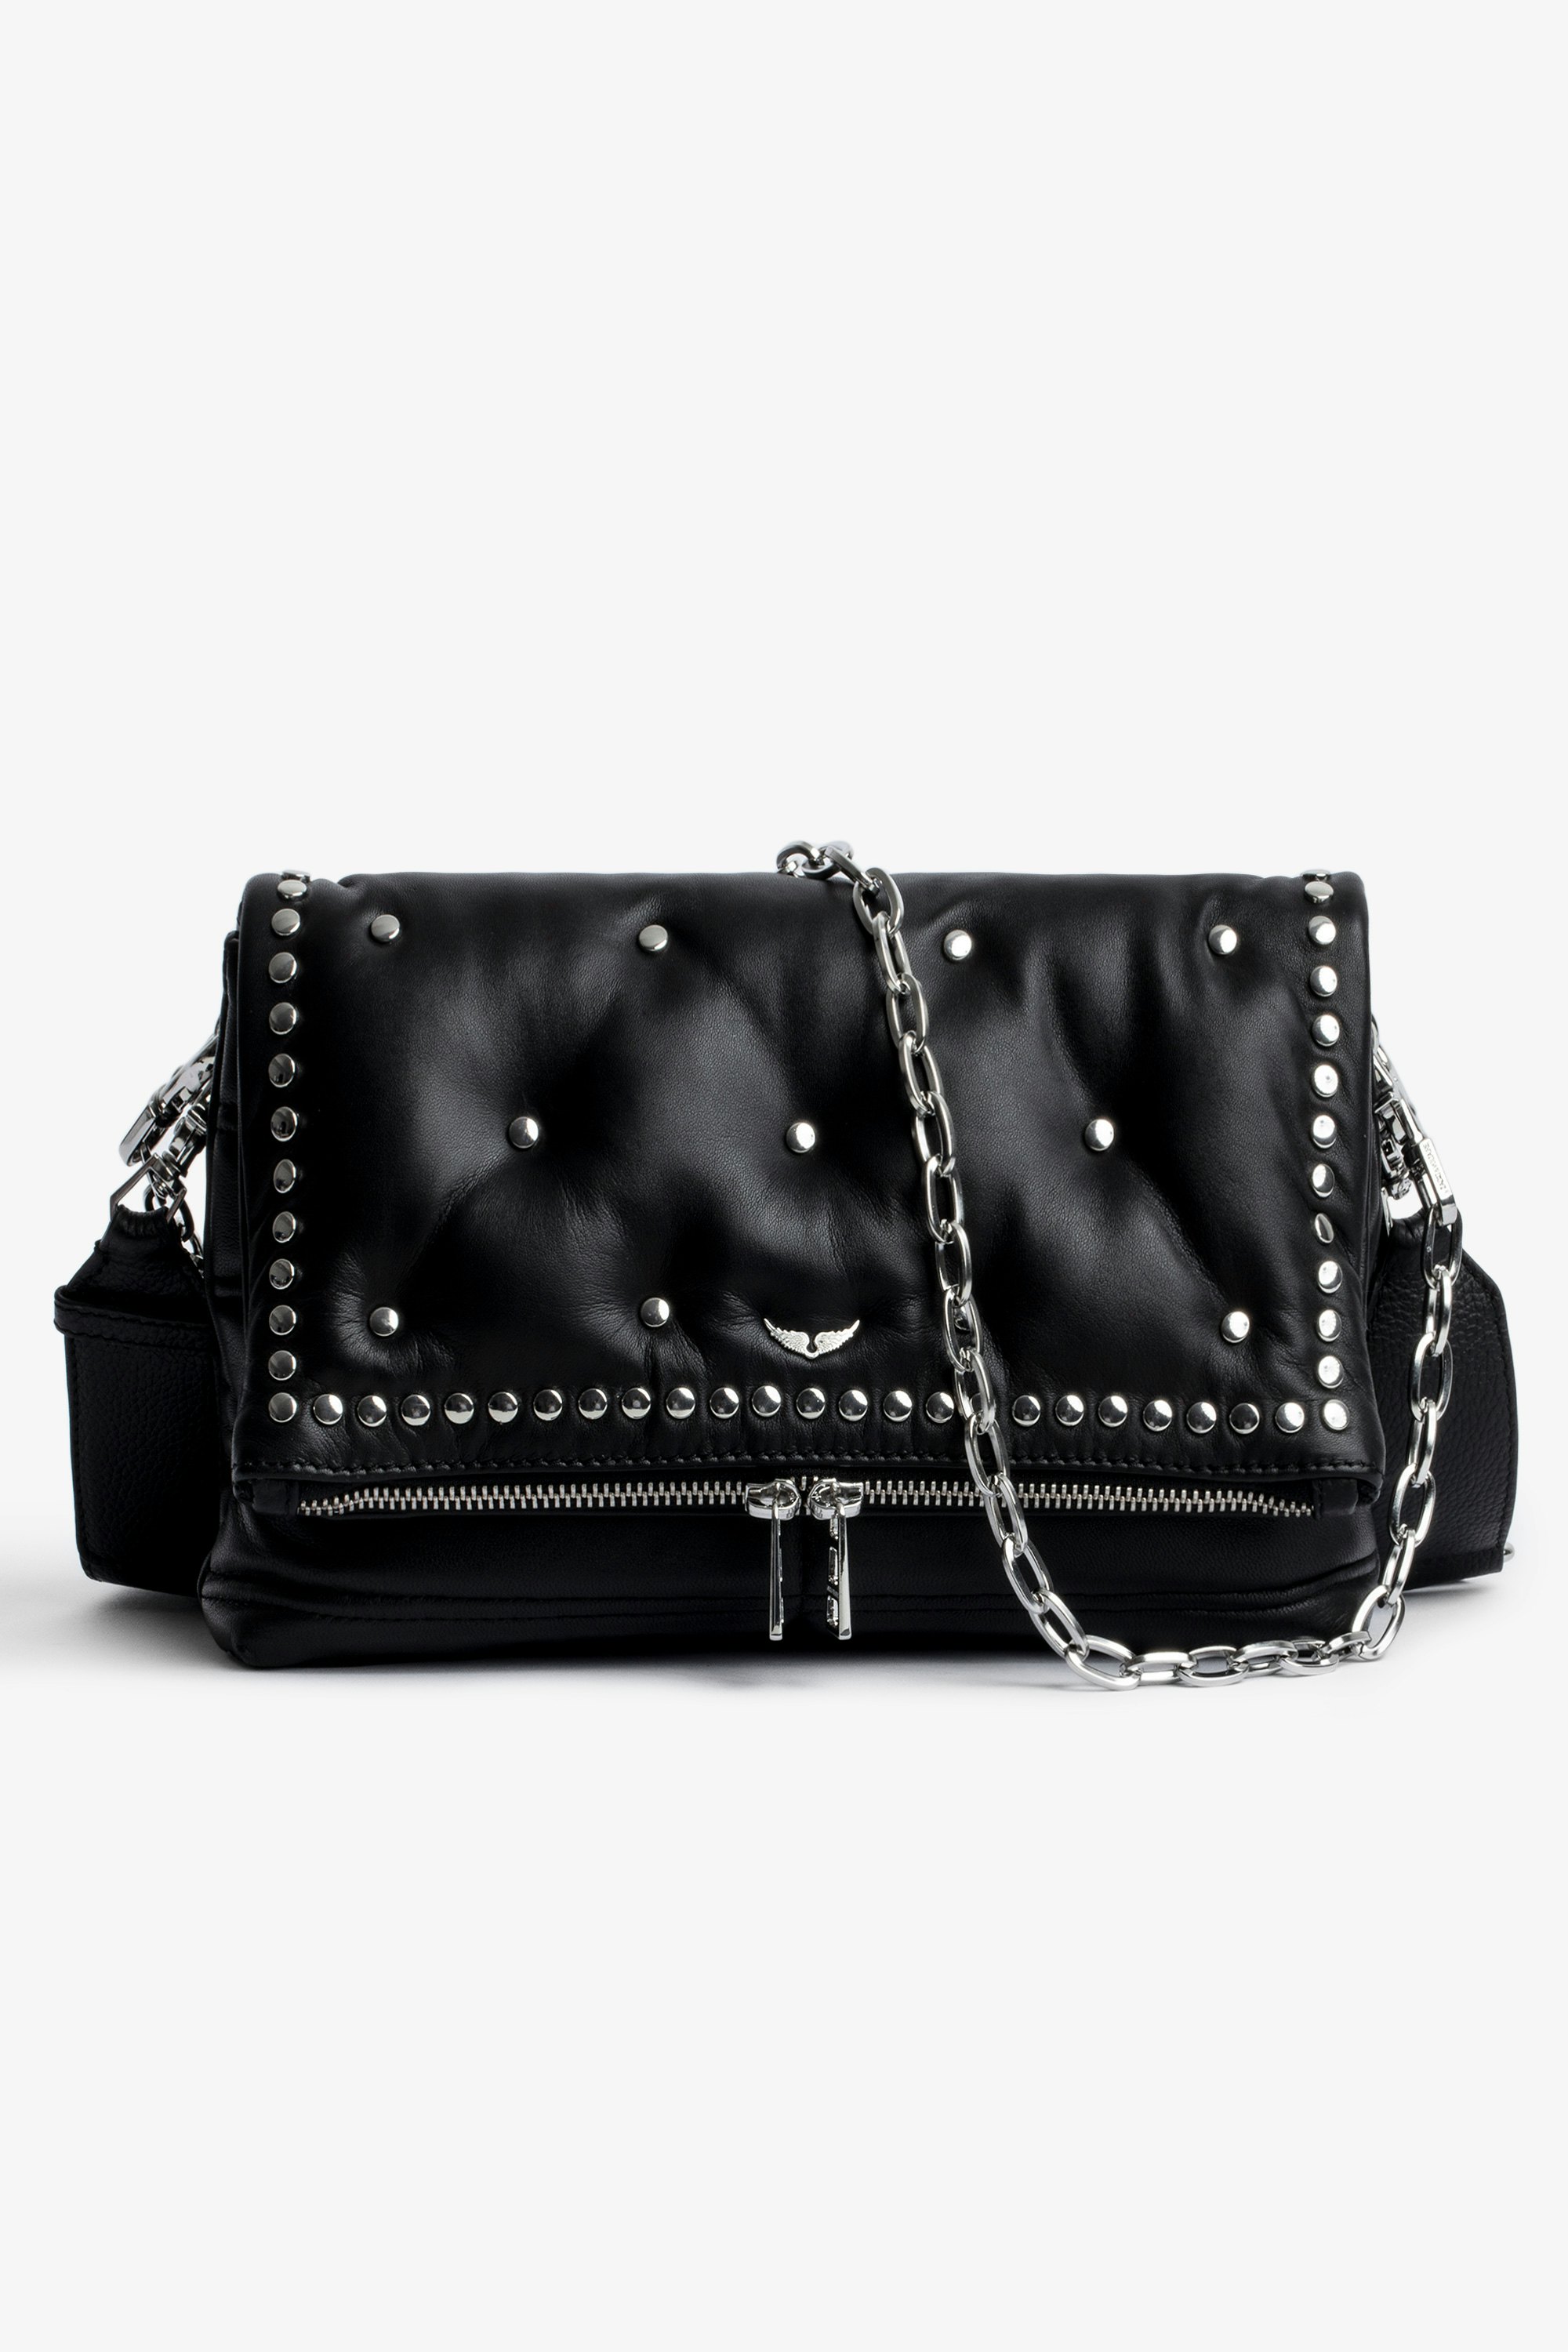 Rocky Rider Bag Women’s black leather bag with studs and a shoulder strap